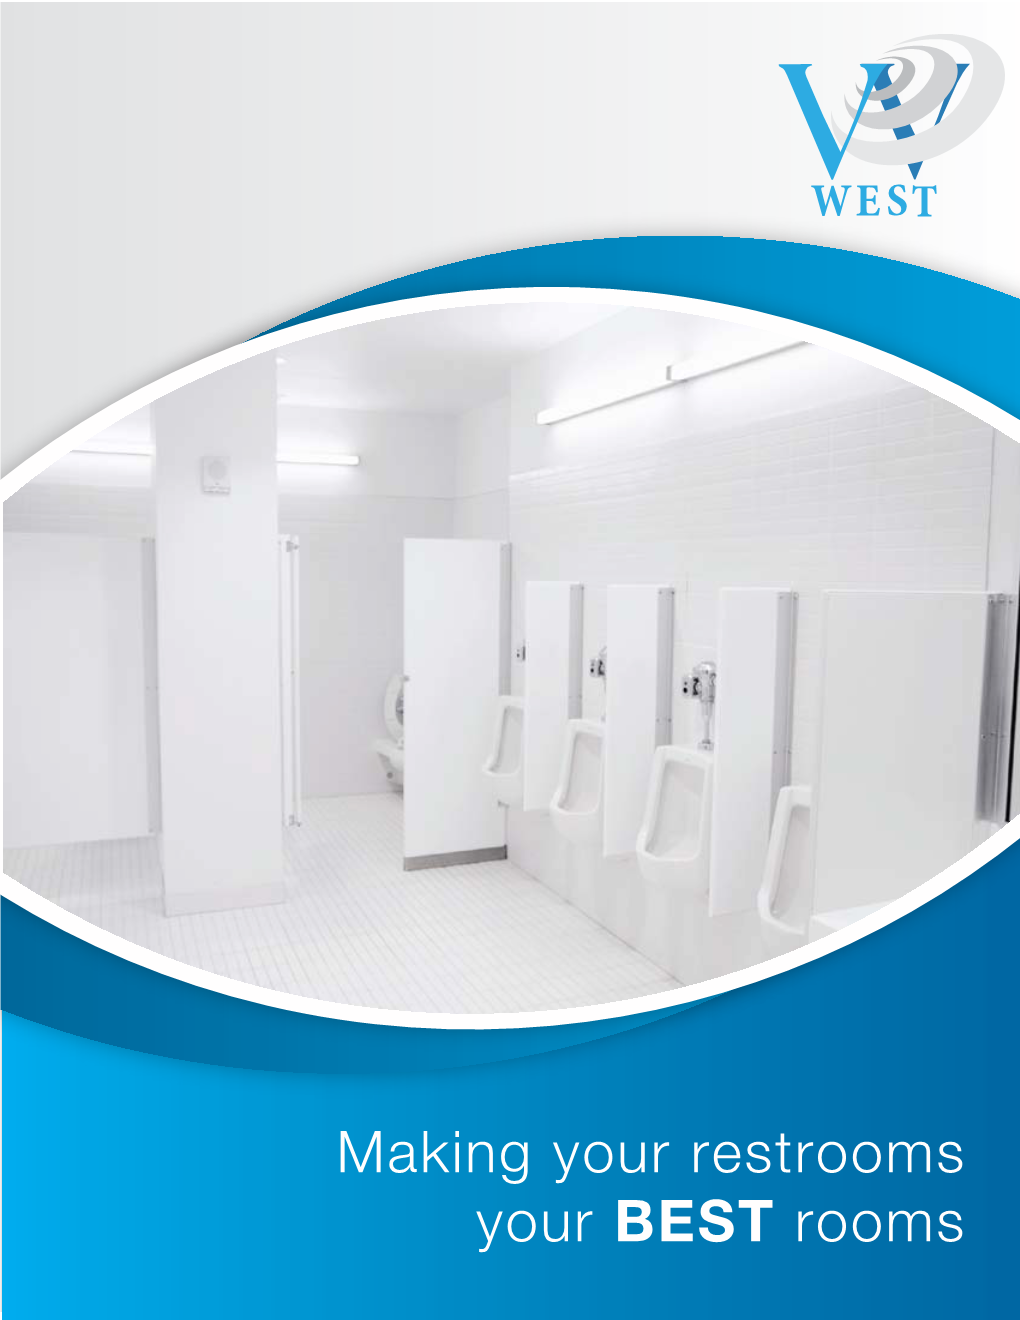 Making Your Restrooms Your BEST Rooms